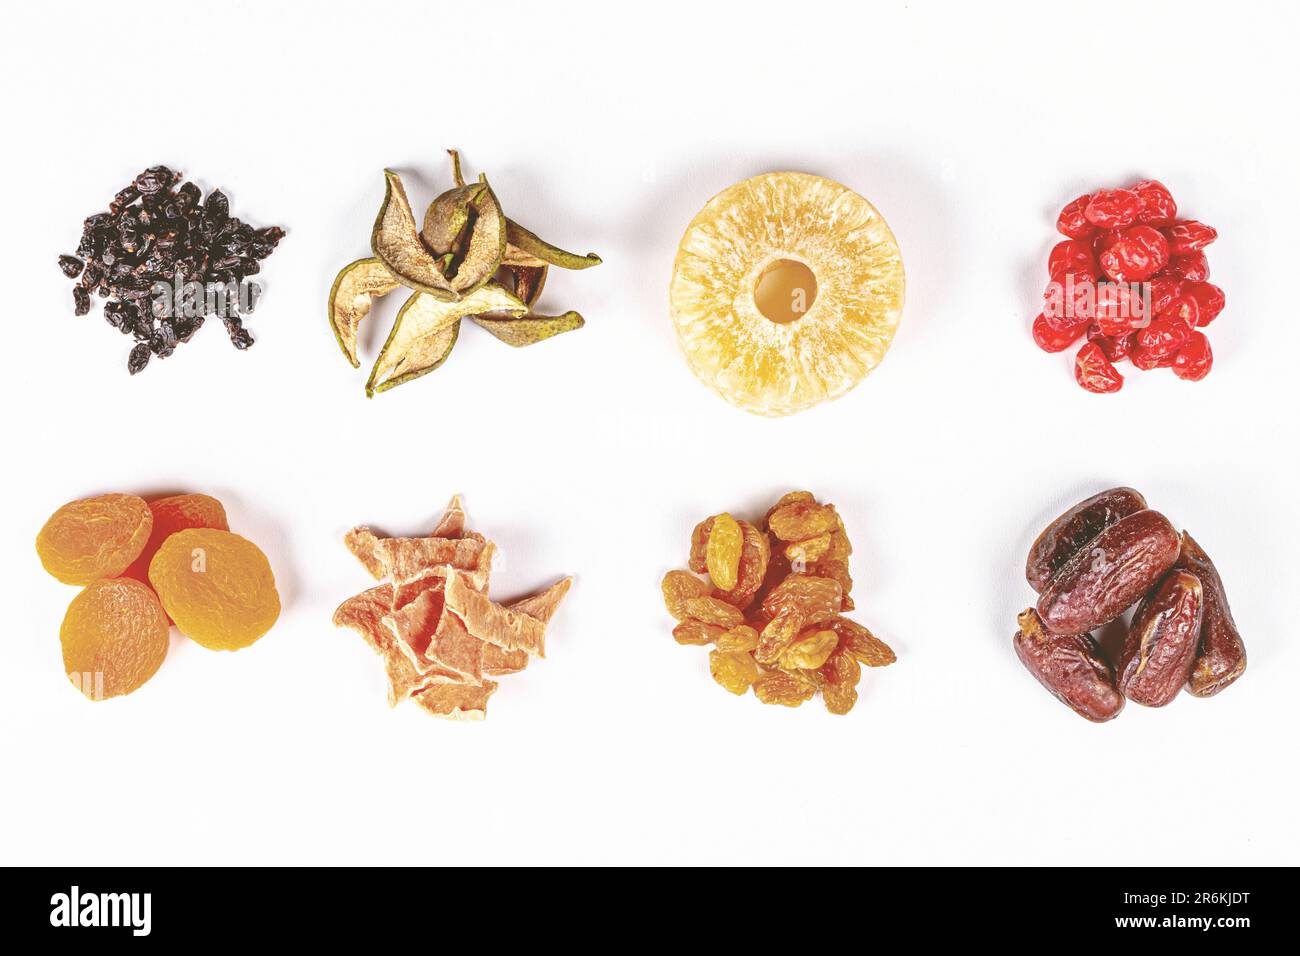 An assortment of dried fruits consisting of oranges and raisins laid out against a white background Stock Photo